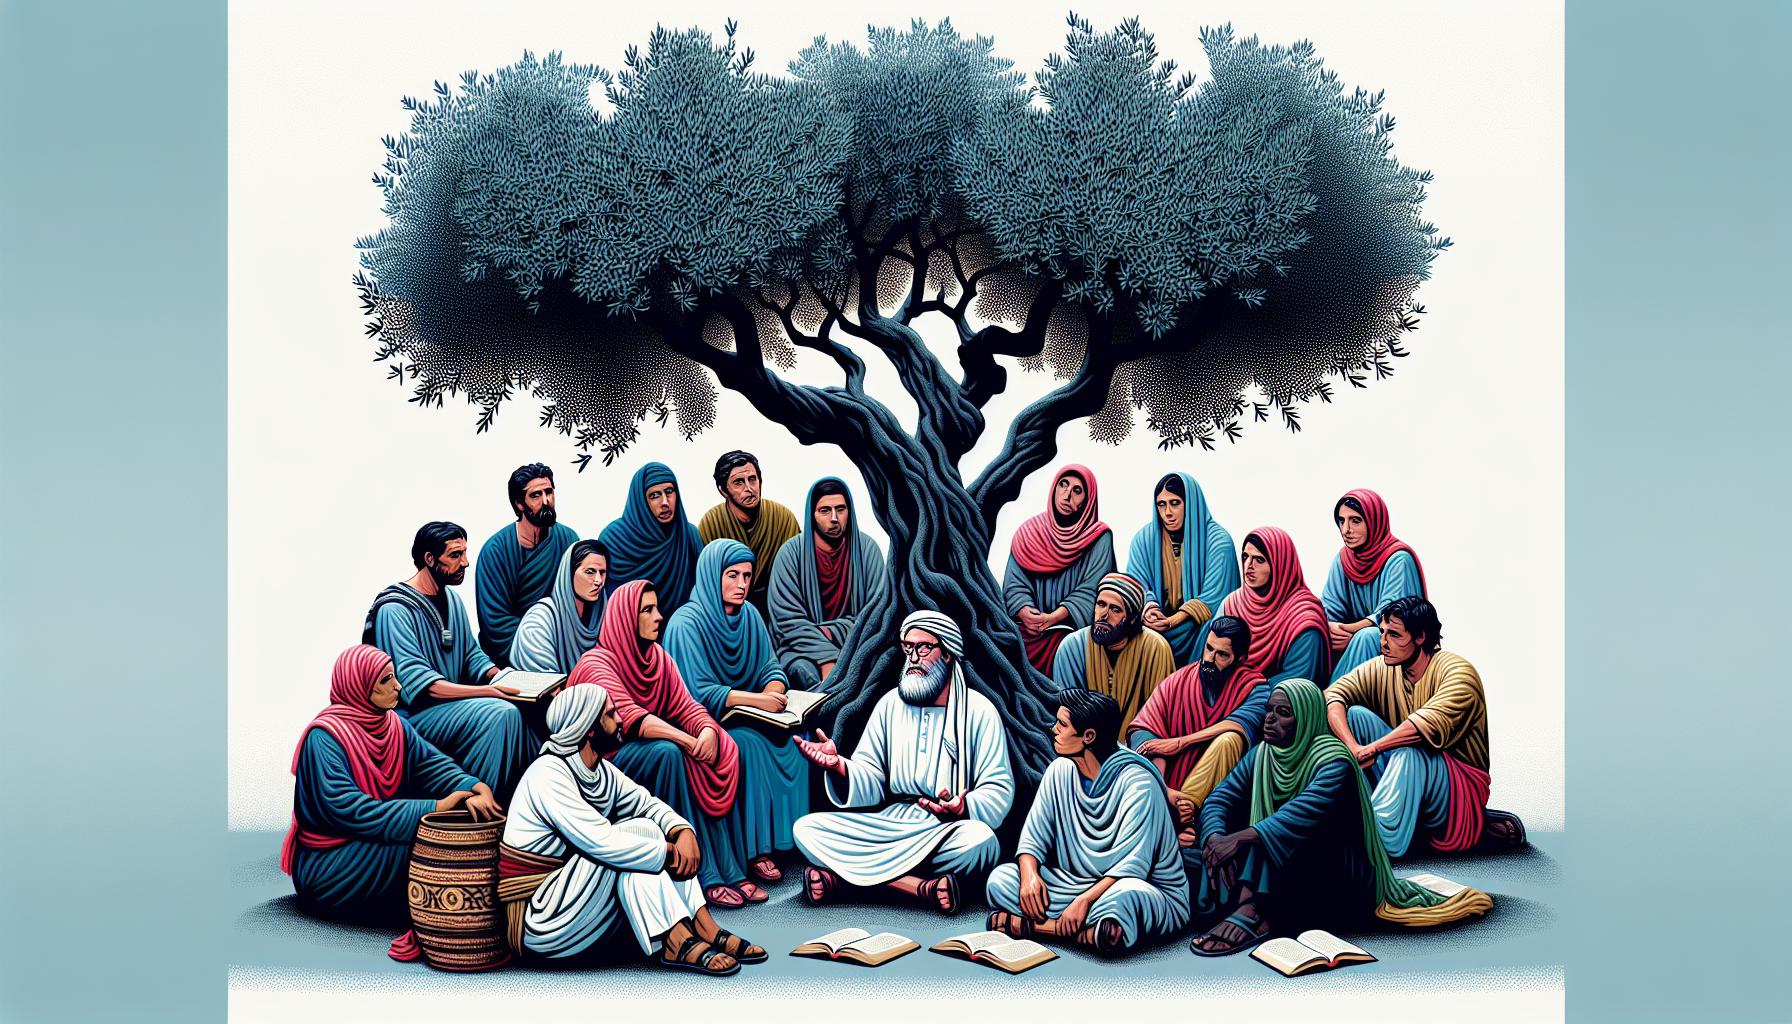 Artistic representation of Jesus sitting under an ancient olive tree, teaching a diverse group of people from different cultures about acts of kindness and compassion.